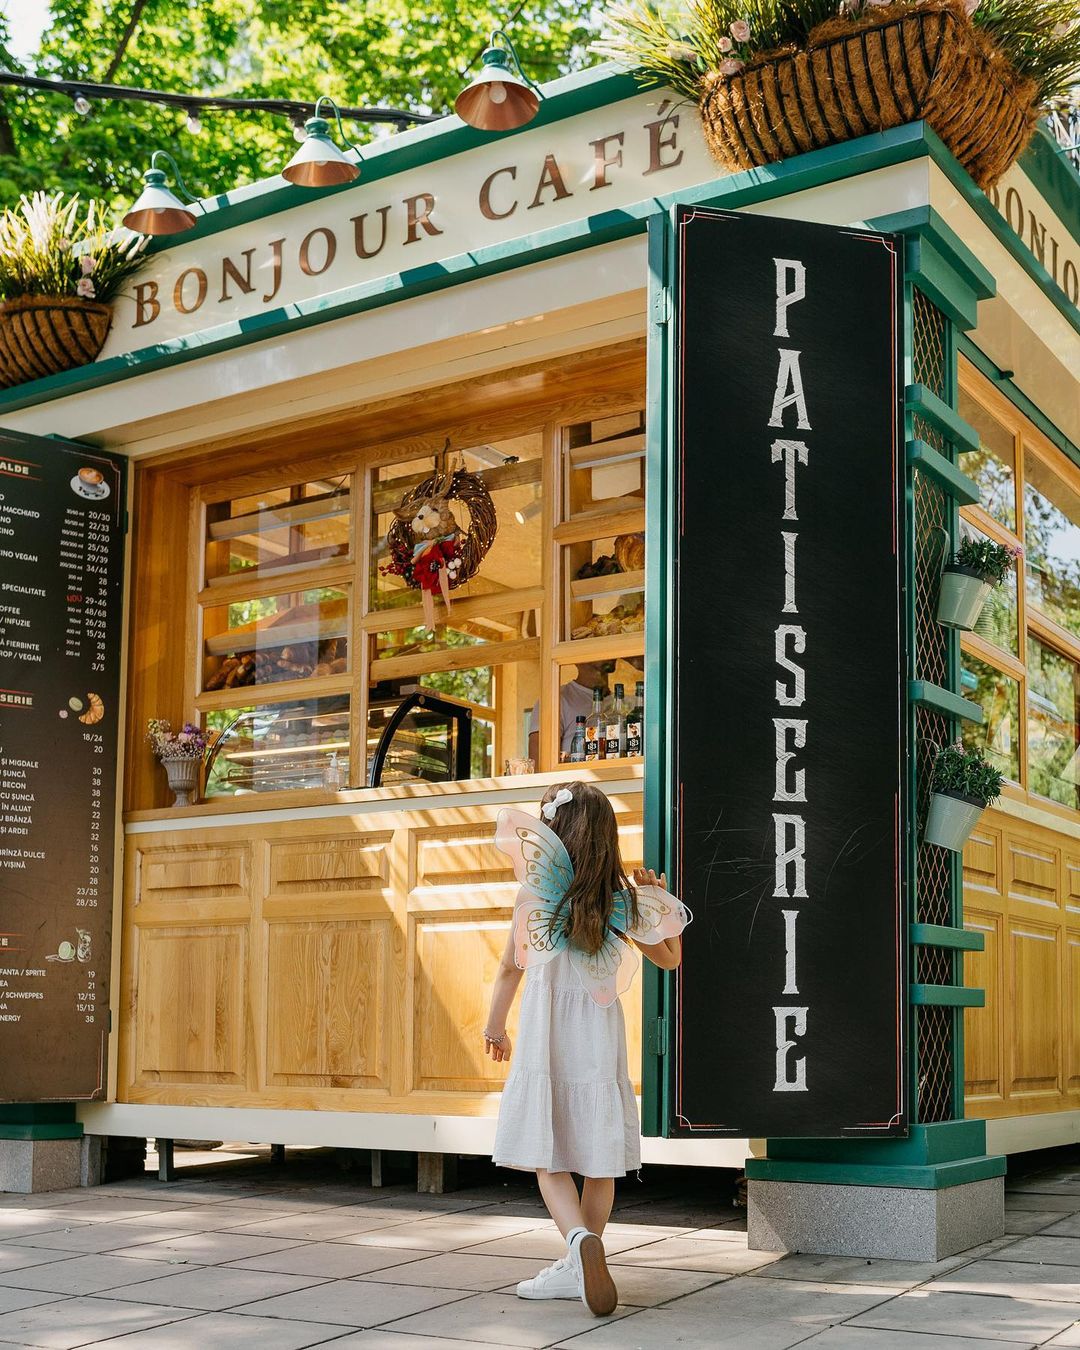 The fairytale coffee shop Bonjour Café - Best Places to Visit in Moldova